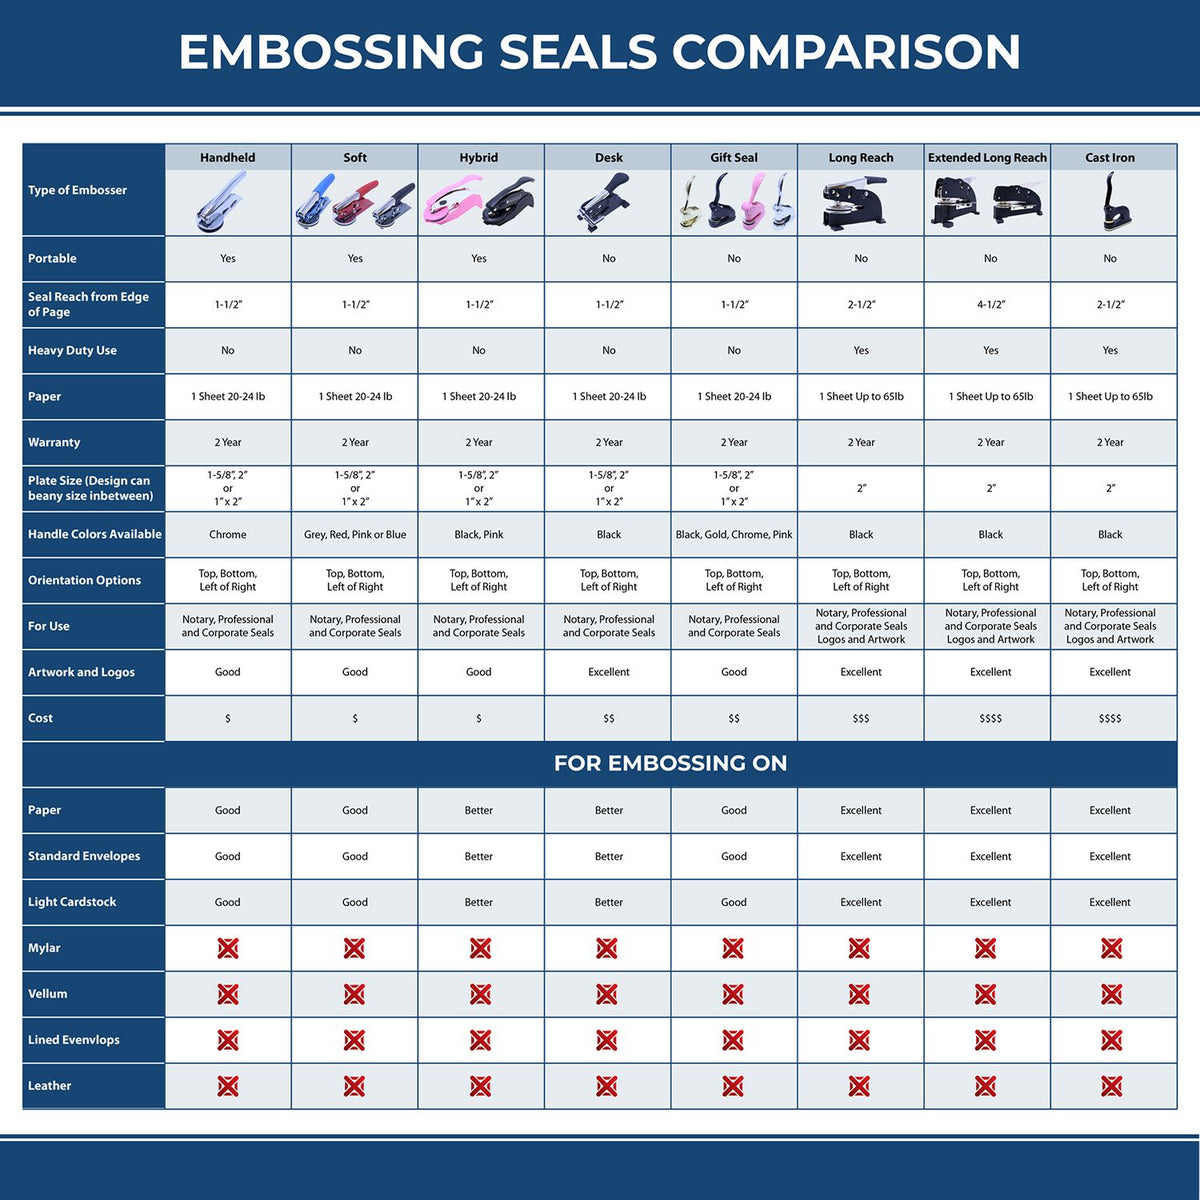 A comparison chart for the different types of mount models available for the Extended Long Reach Louisiana Surveyor Embosser.